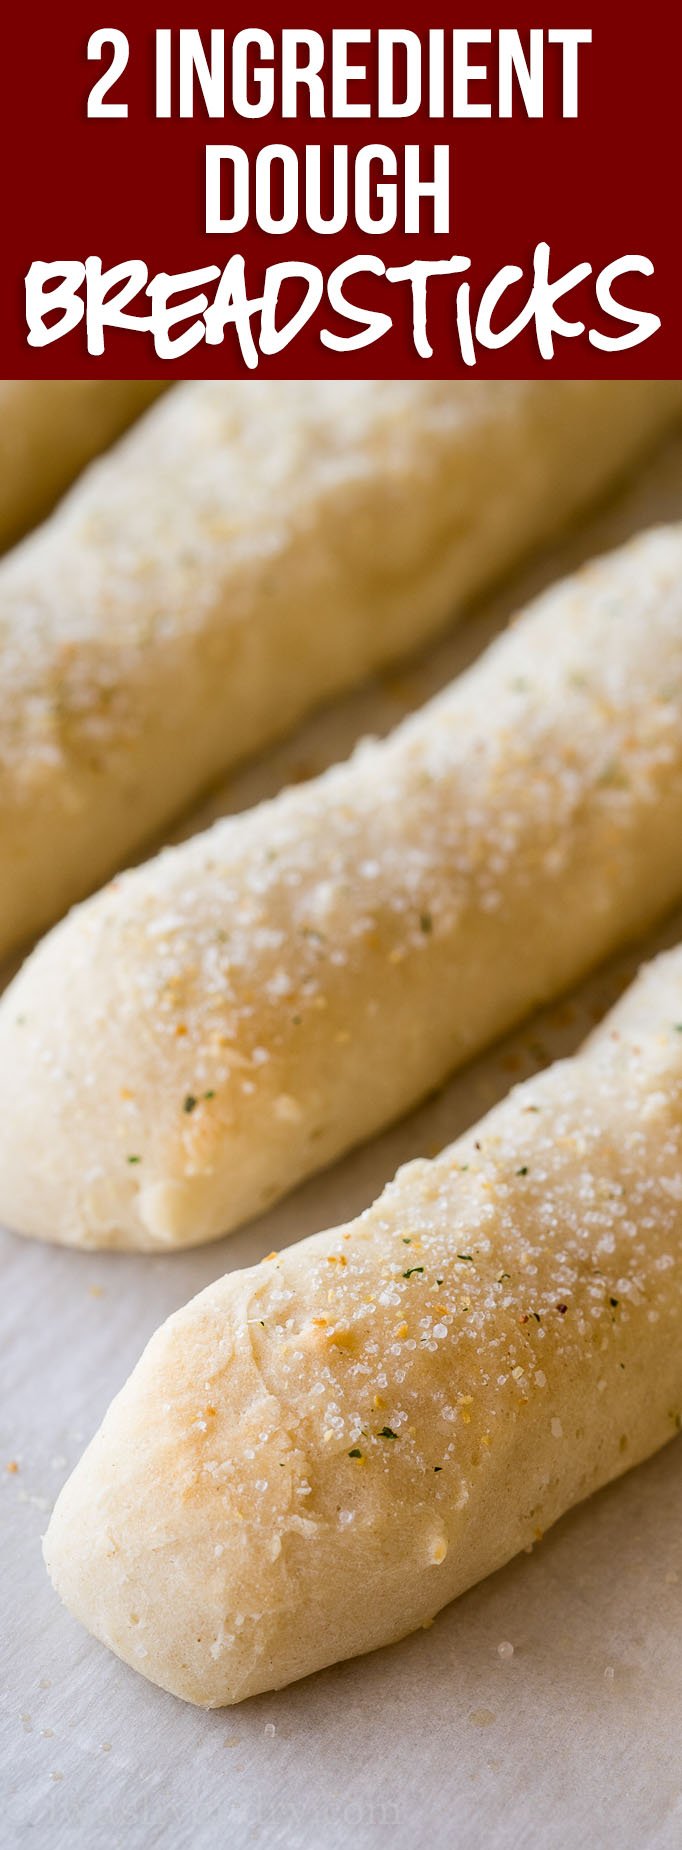 WOW! I was blown away at how delicious and easy these 2 ingredient dough garlic breadsticks are! My family LOVED this super easy bread!